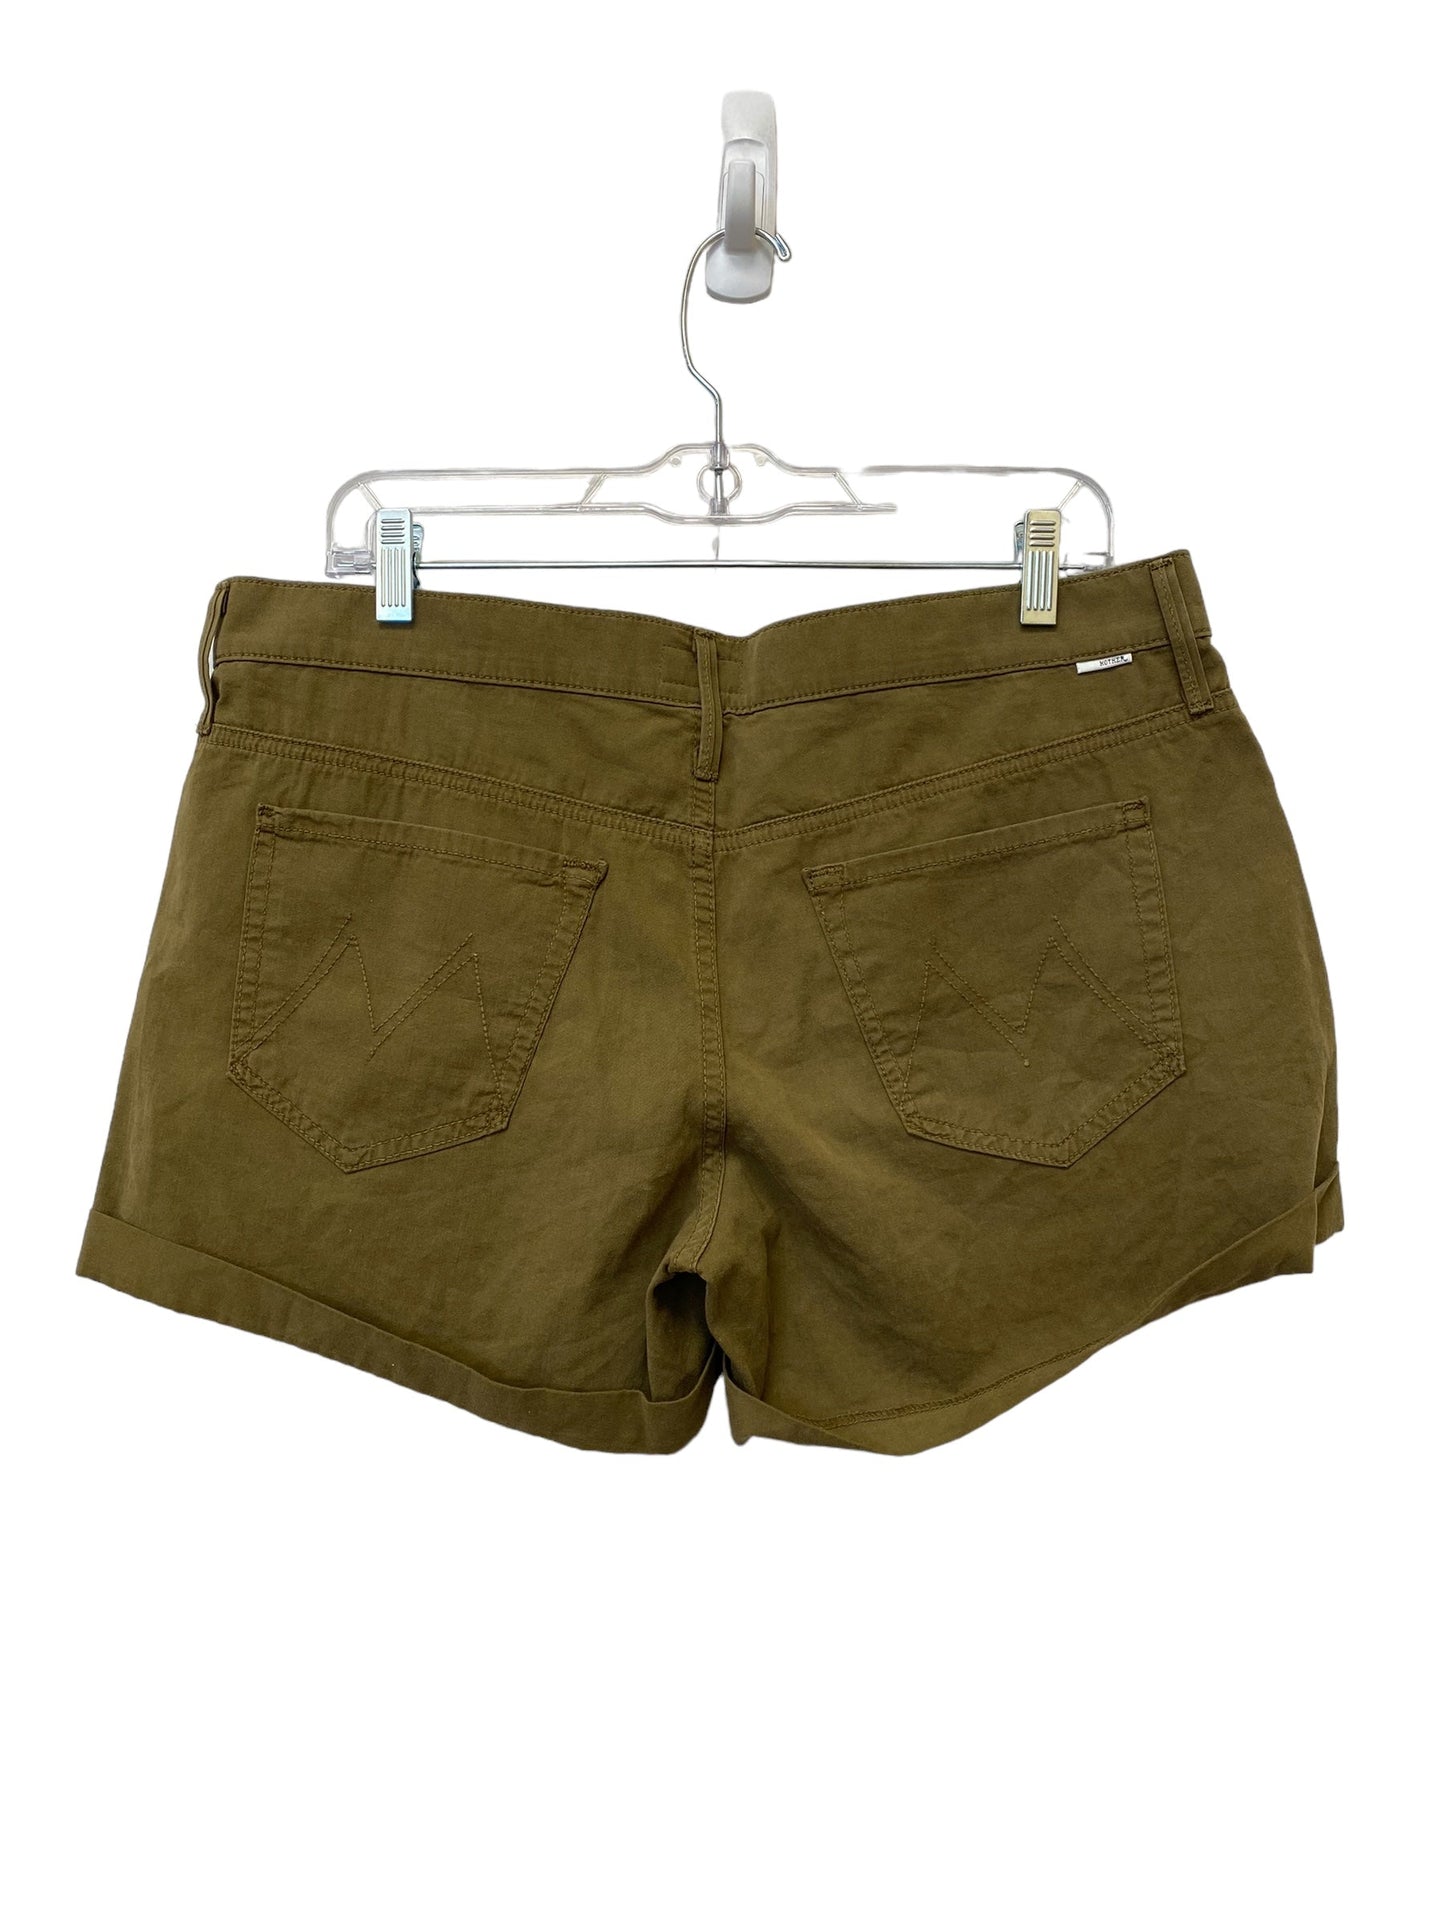 Green Shorts Mother, Size 29